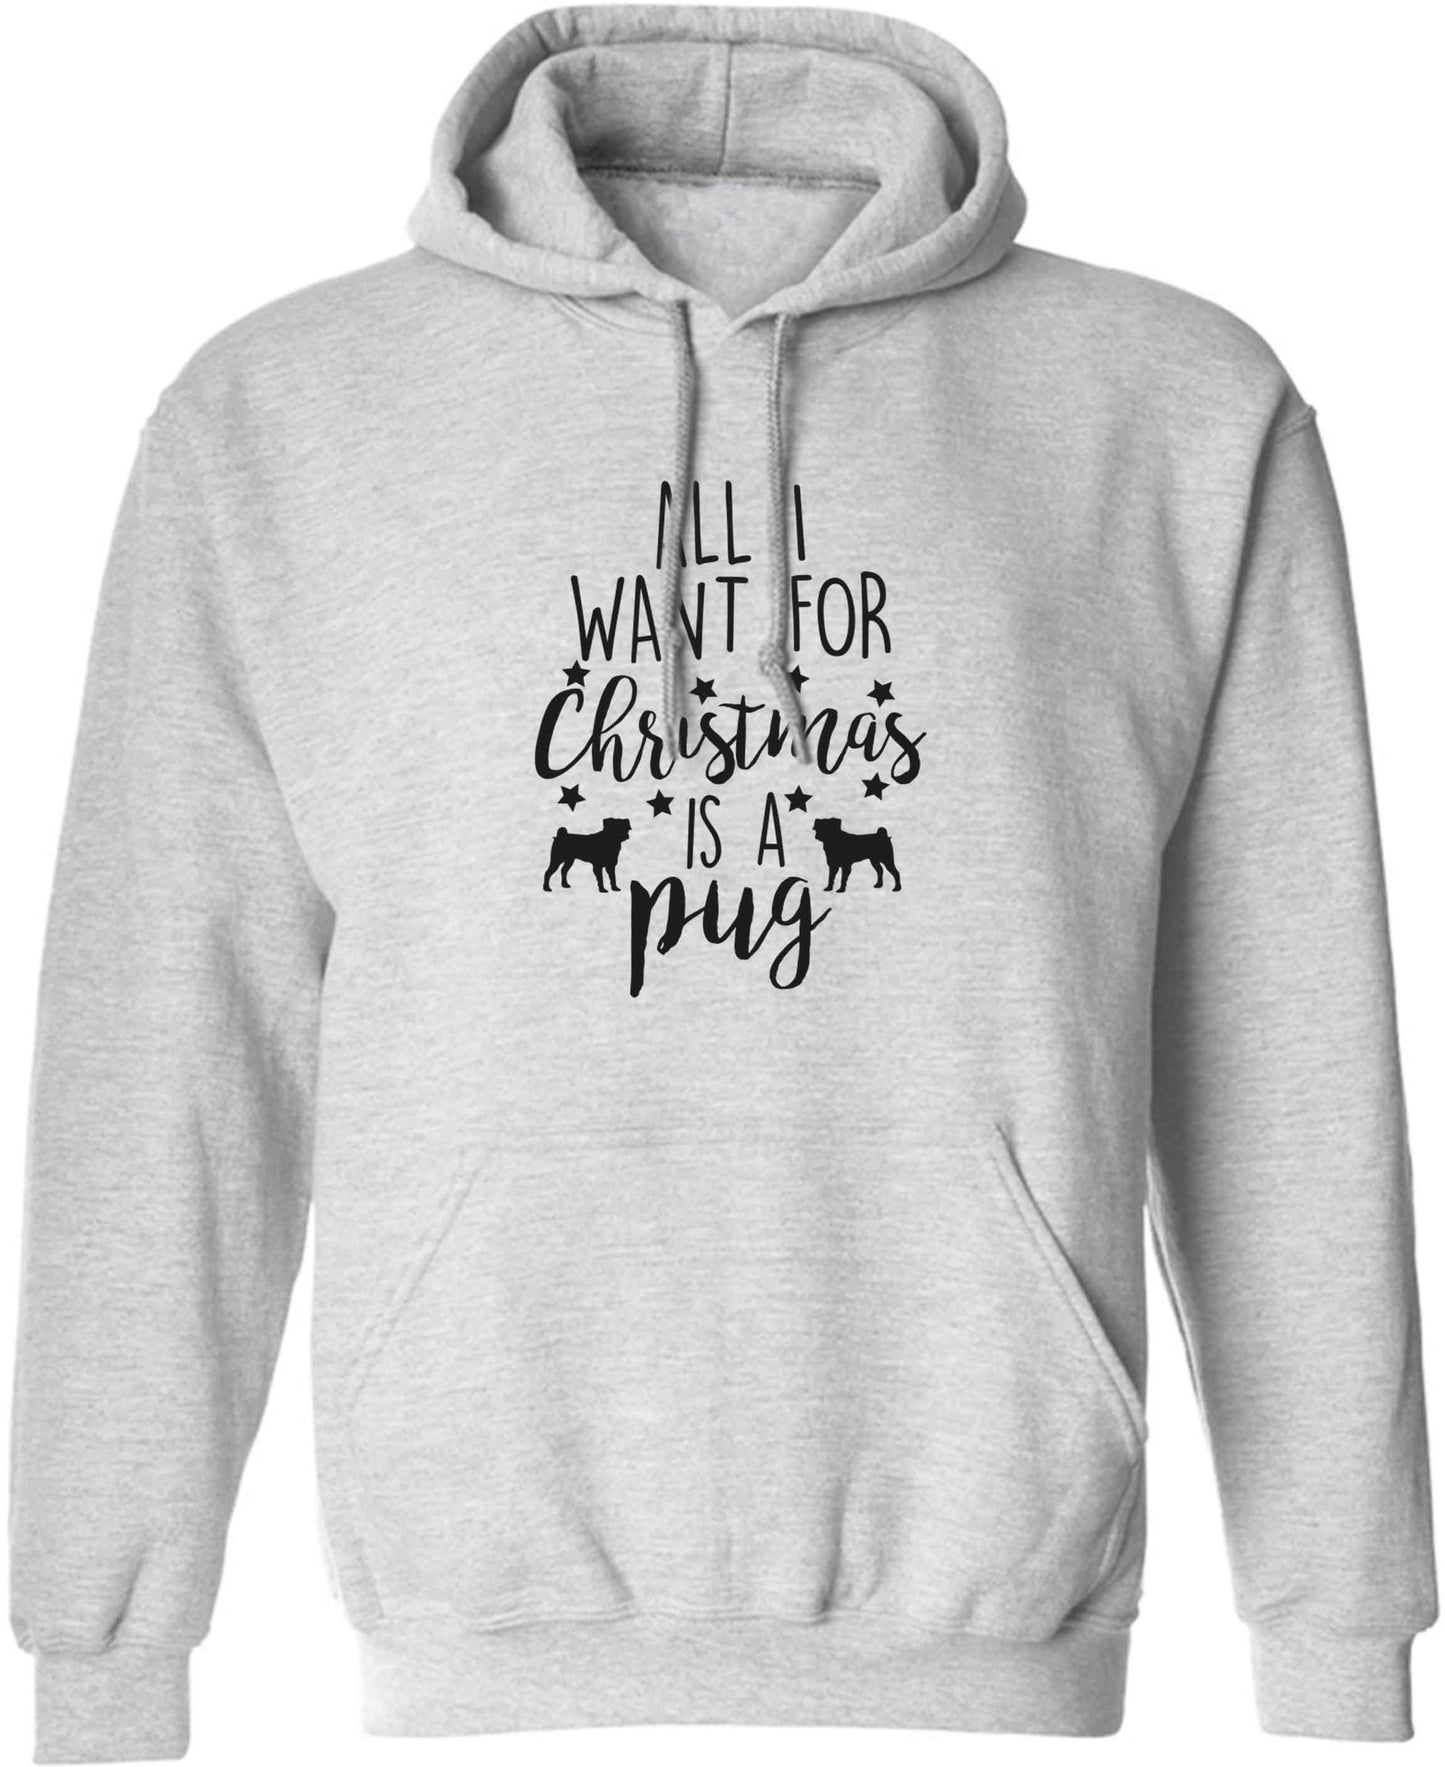 All I want for Christmas is a pug adults unisex grey hoodie 2XL